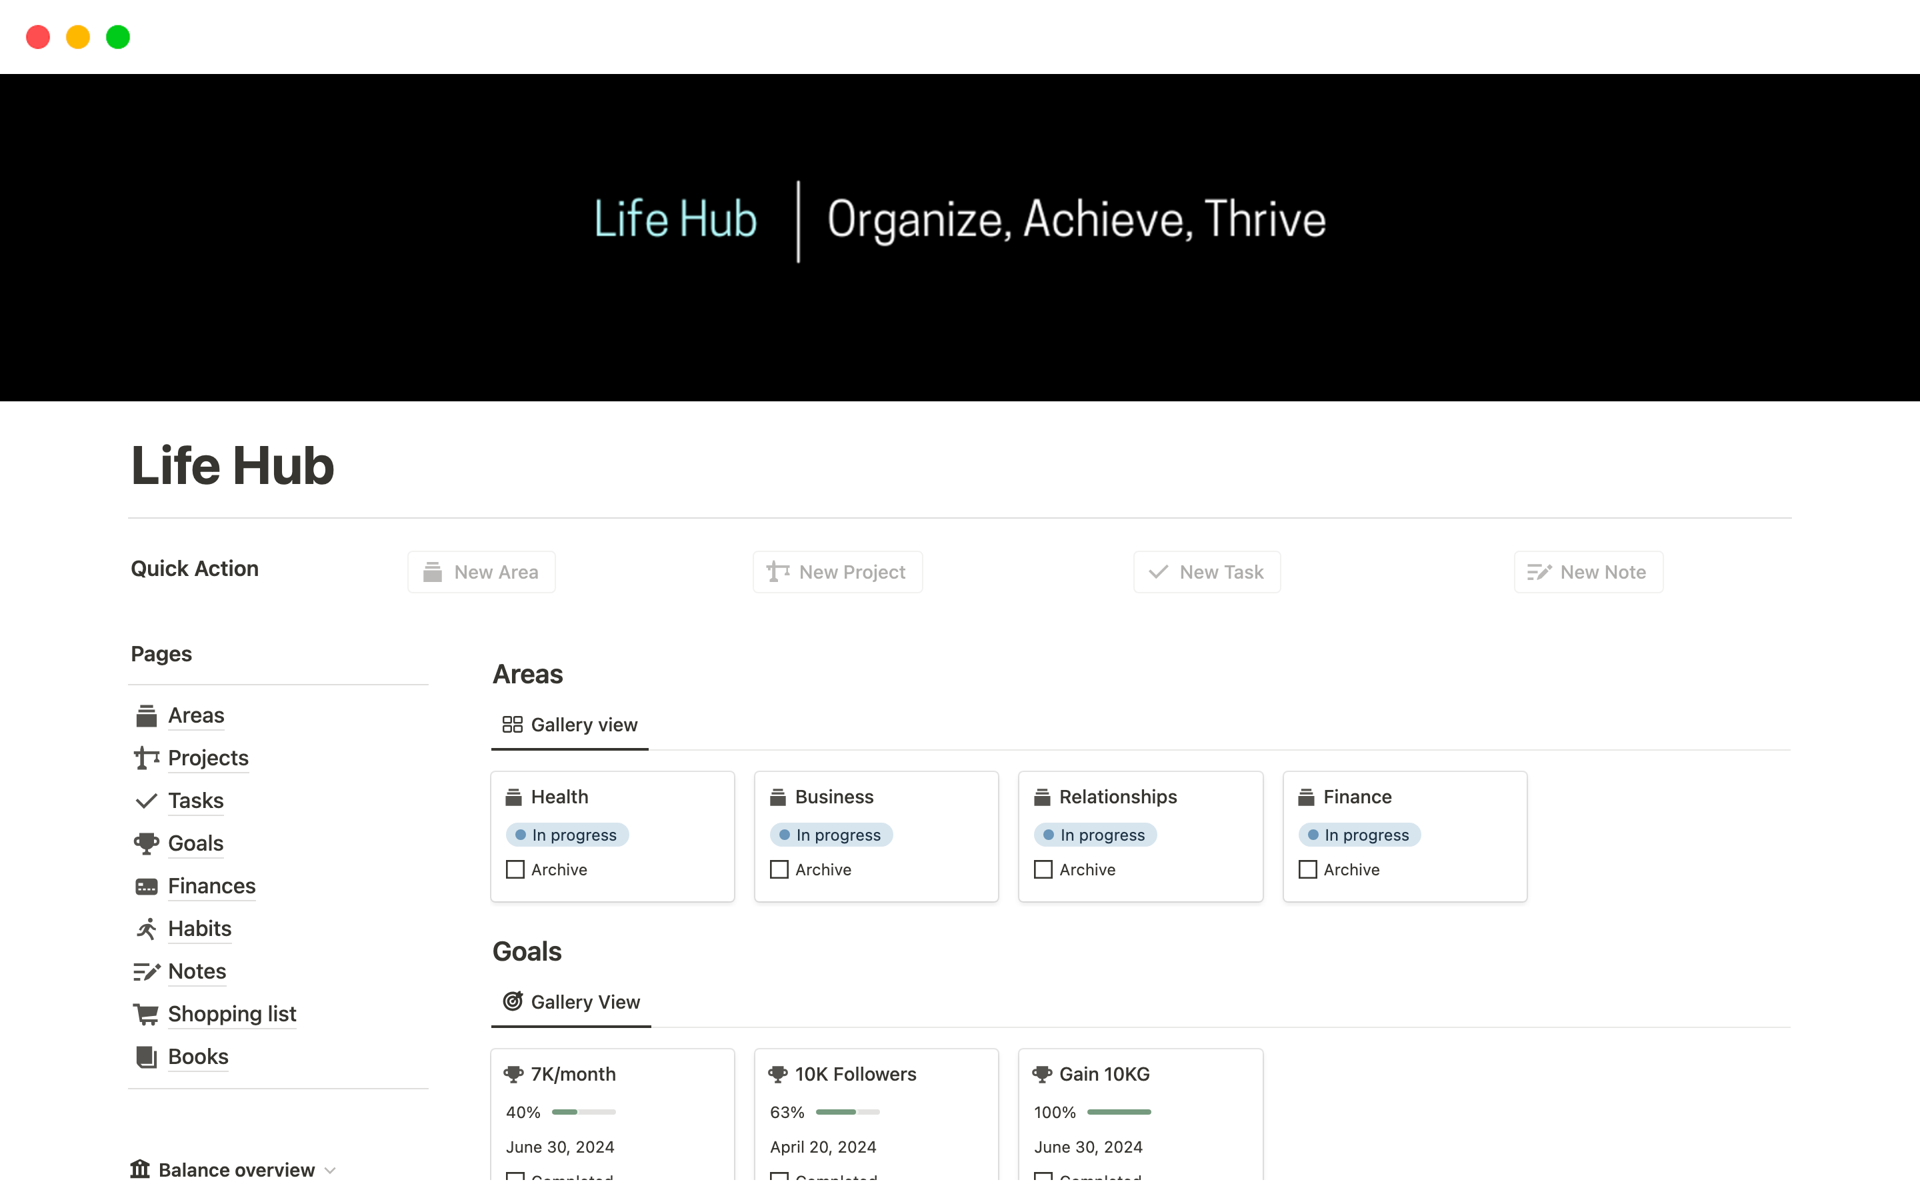 "Life Hub" is a comprehensive Notion template designed to harmonize and streamline various aspects of your life, providing organization and focus to help you achieve your goals.